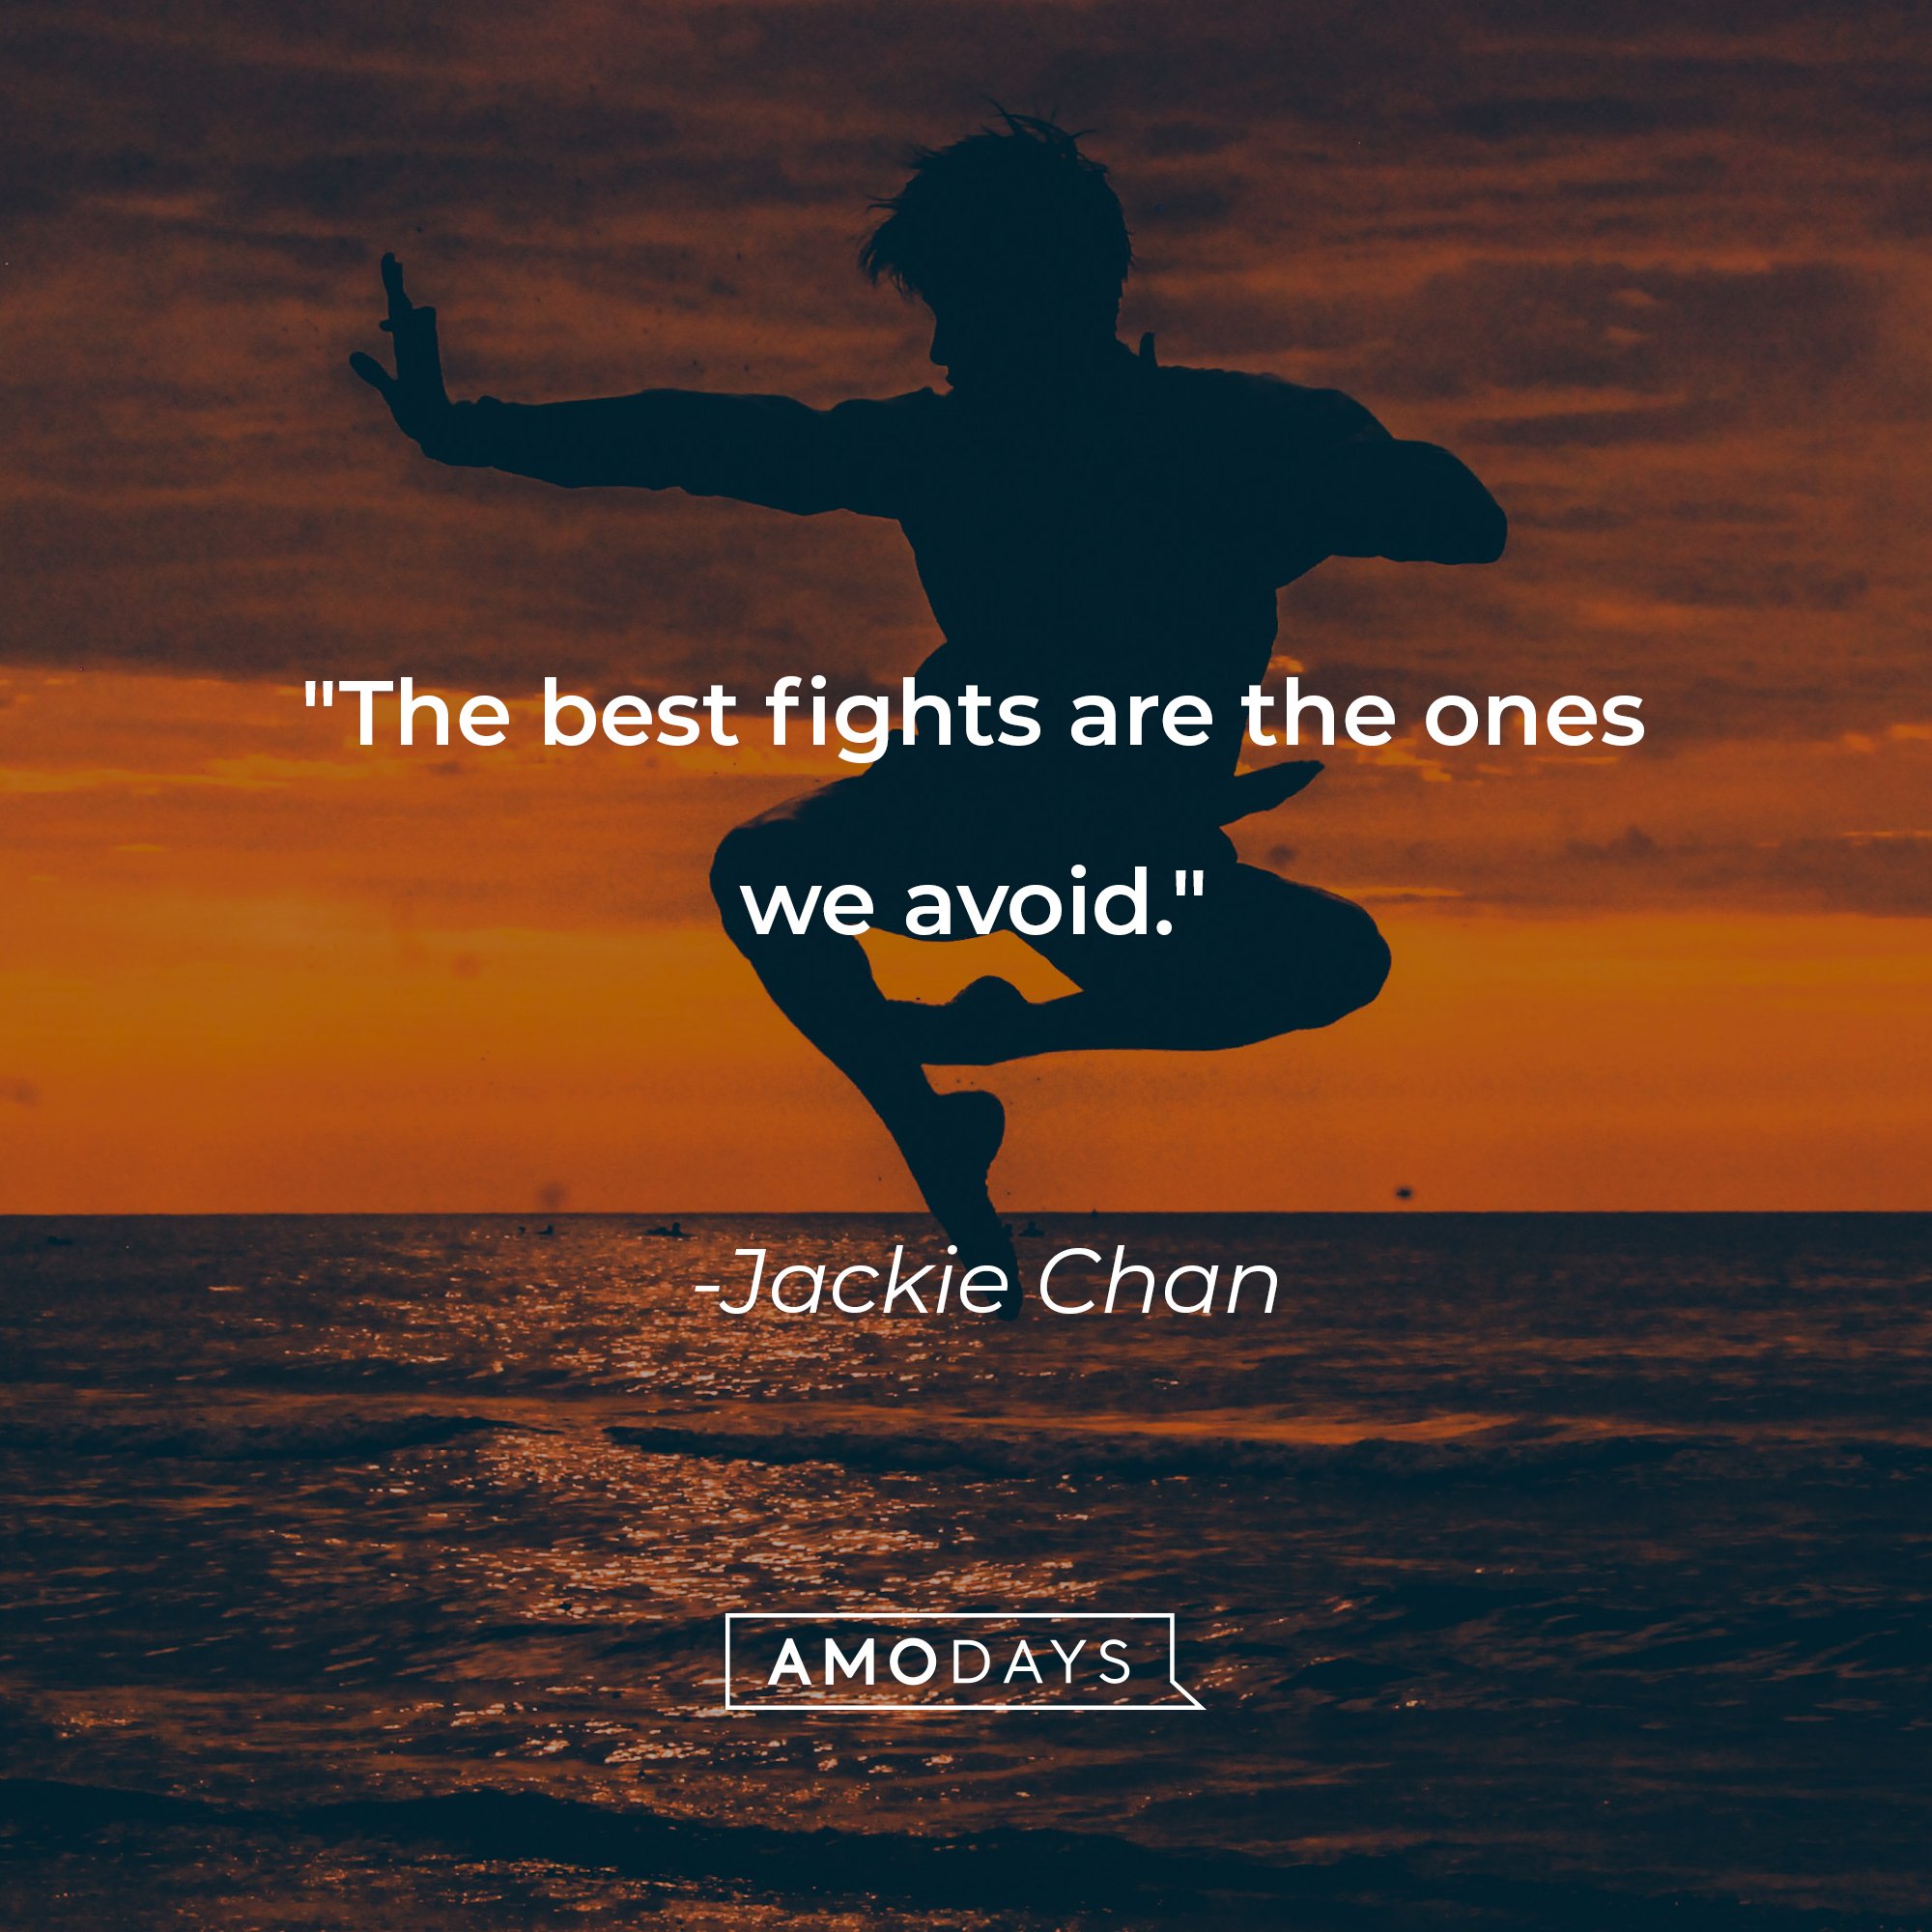 Jackie Chan’s quote: "The best fights are the ones we avoid." | Image: AmoDays   